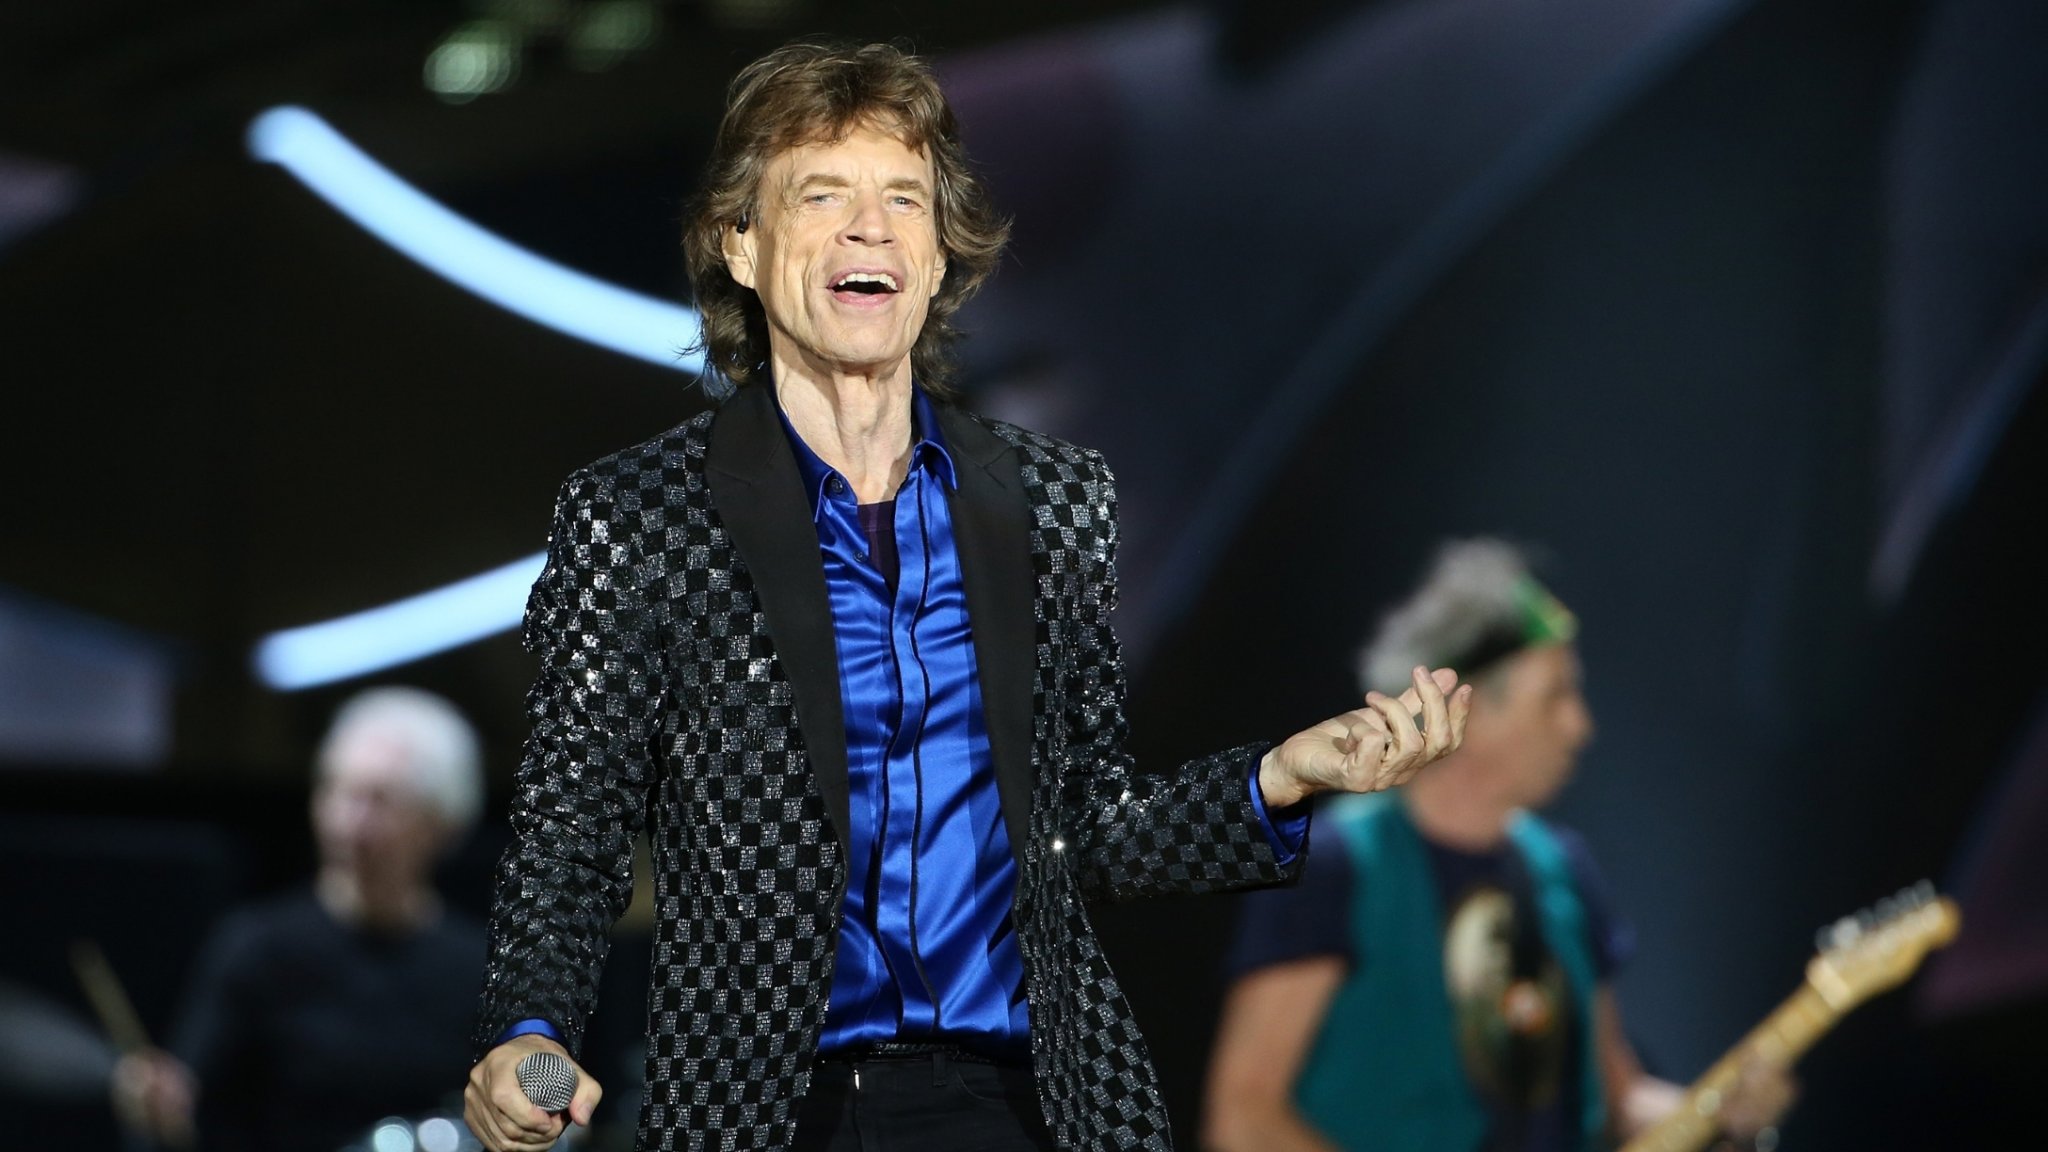 Mick Jagger, 77, Looks Like A Happy, Exuberant Dad In Pic With 4-Year-Old Son, Devereaux